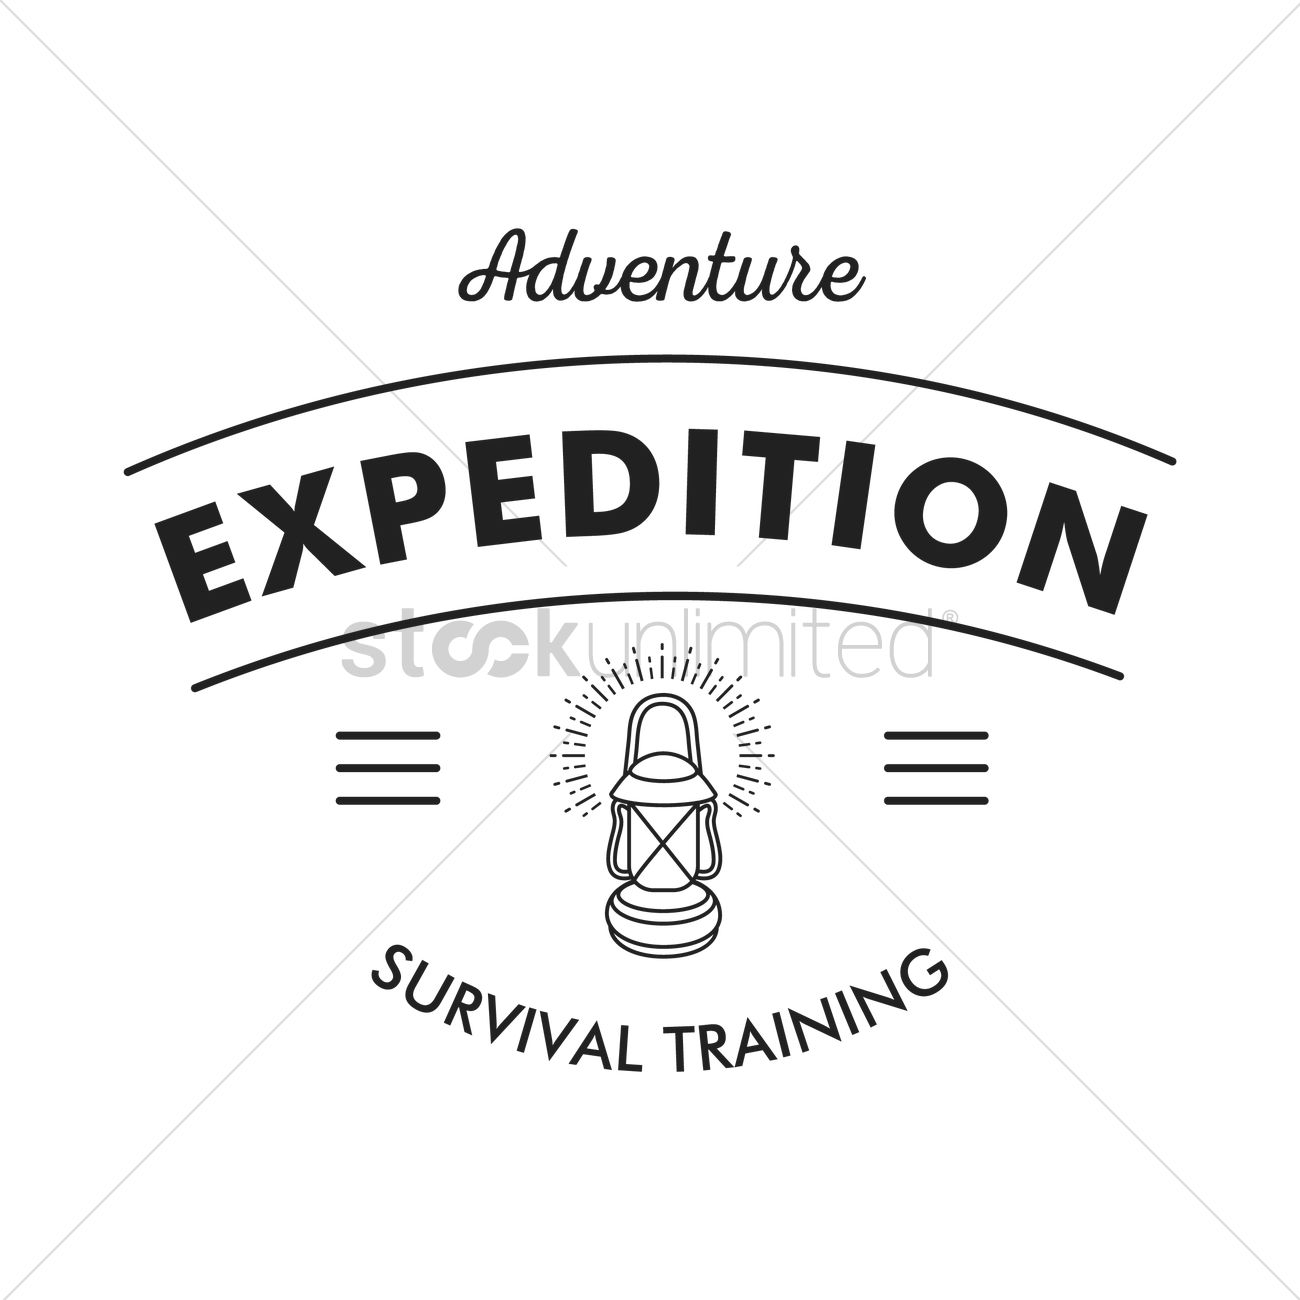 Survival training expedition Vector Image.